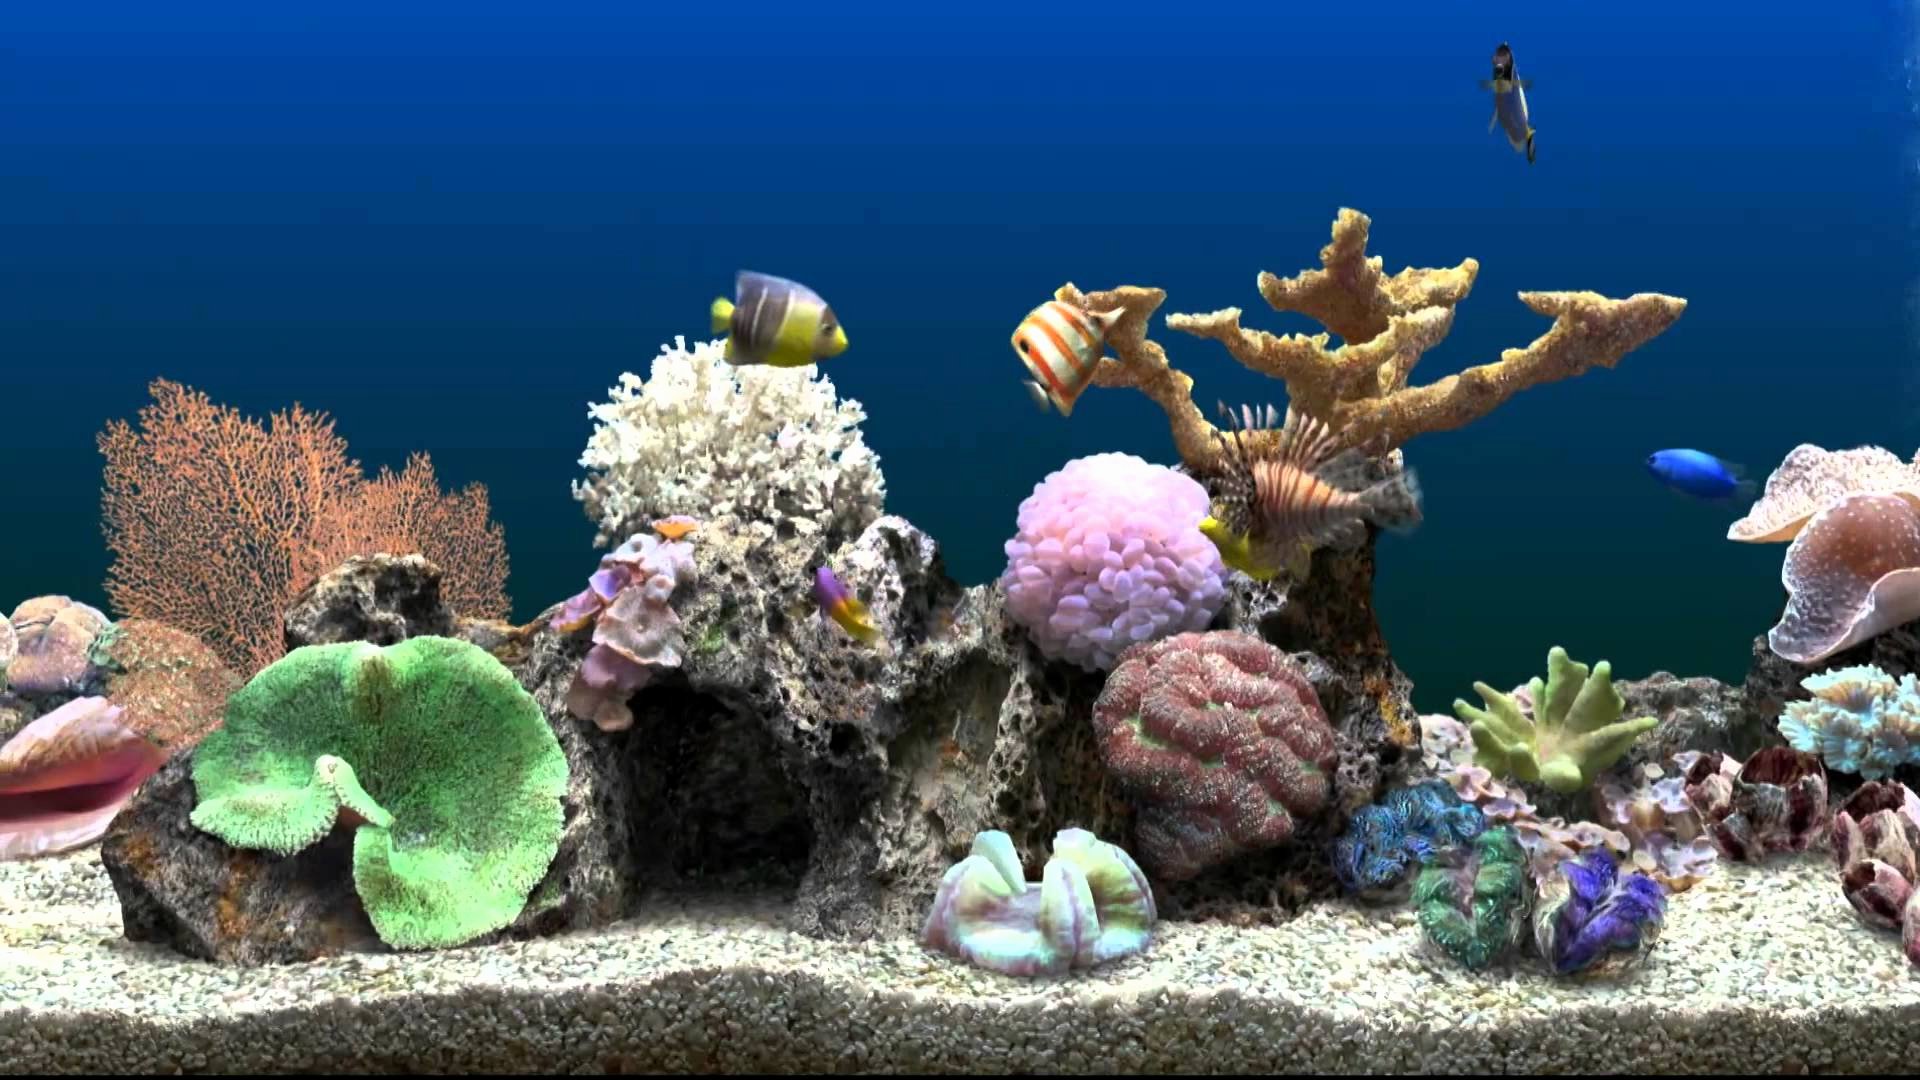 Fish Tank Background Pictures Fresh Fish Tank Backgrounds Download